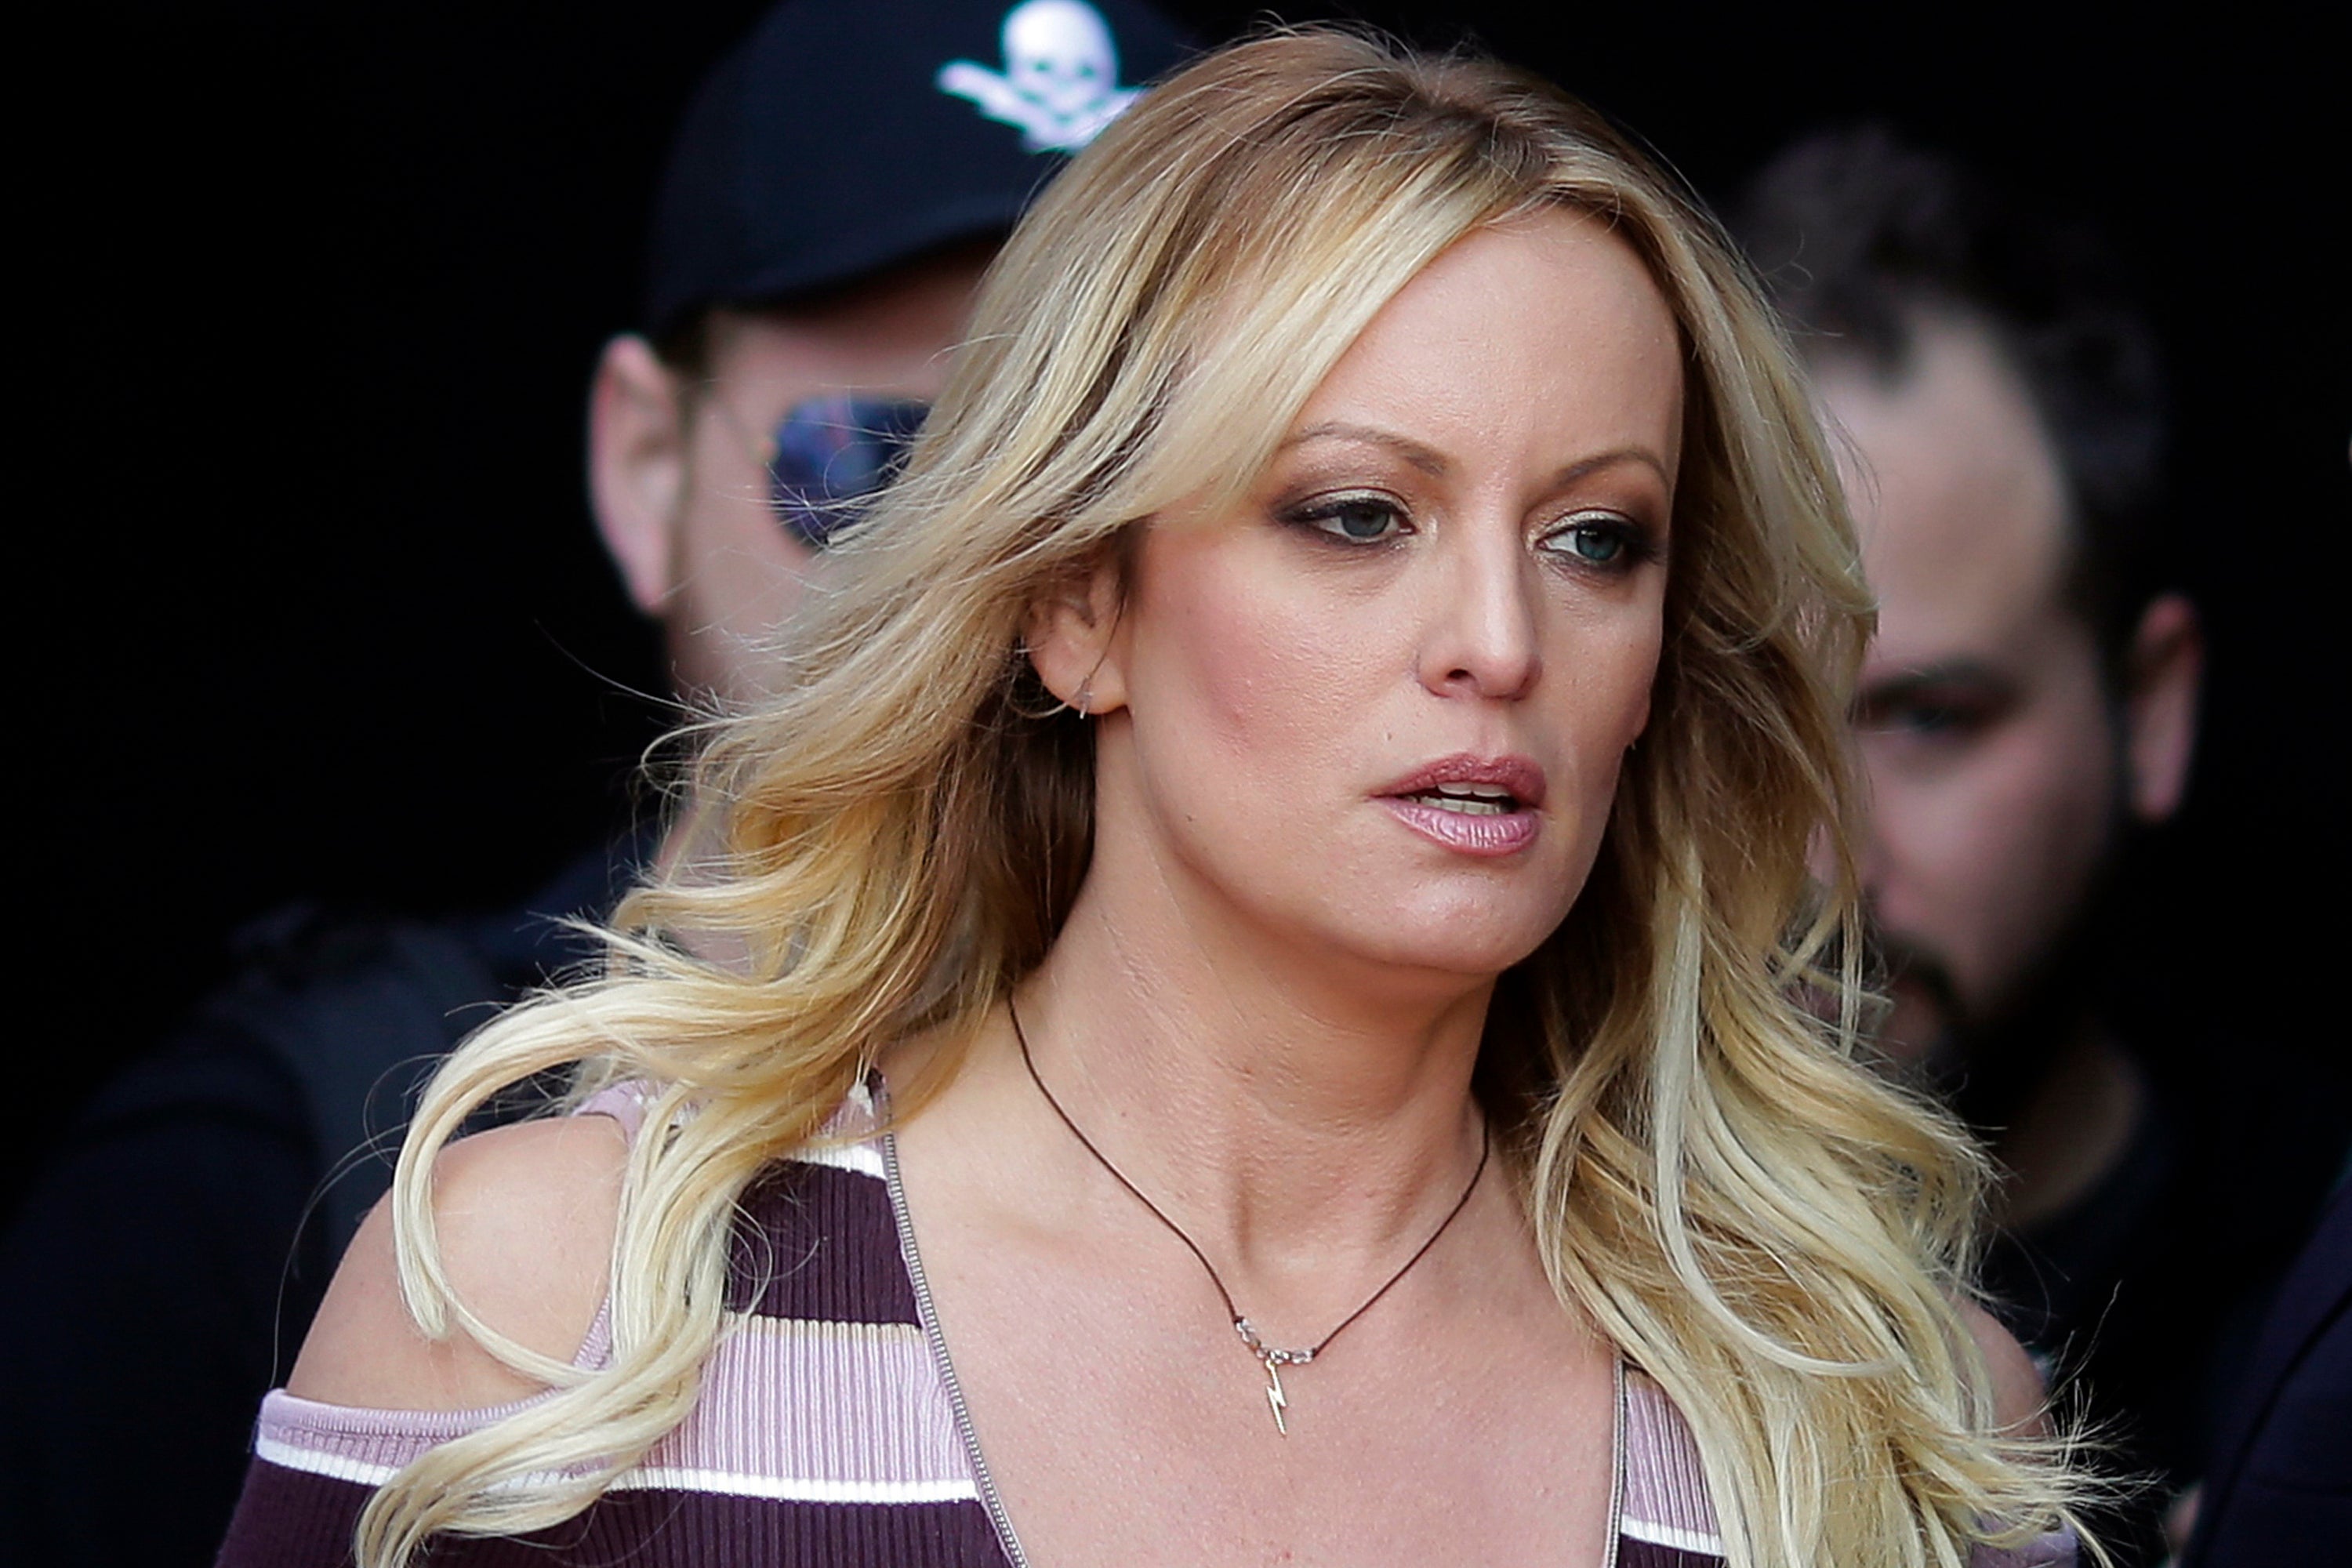 Stormy Daniels alleges she had an affair with Trump